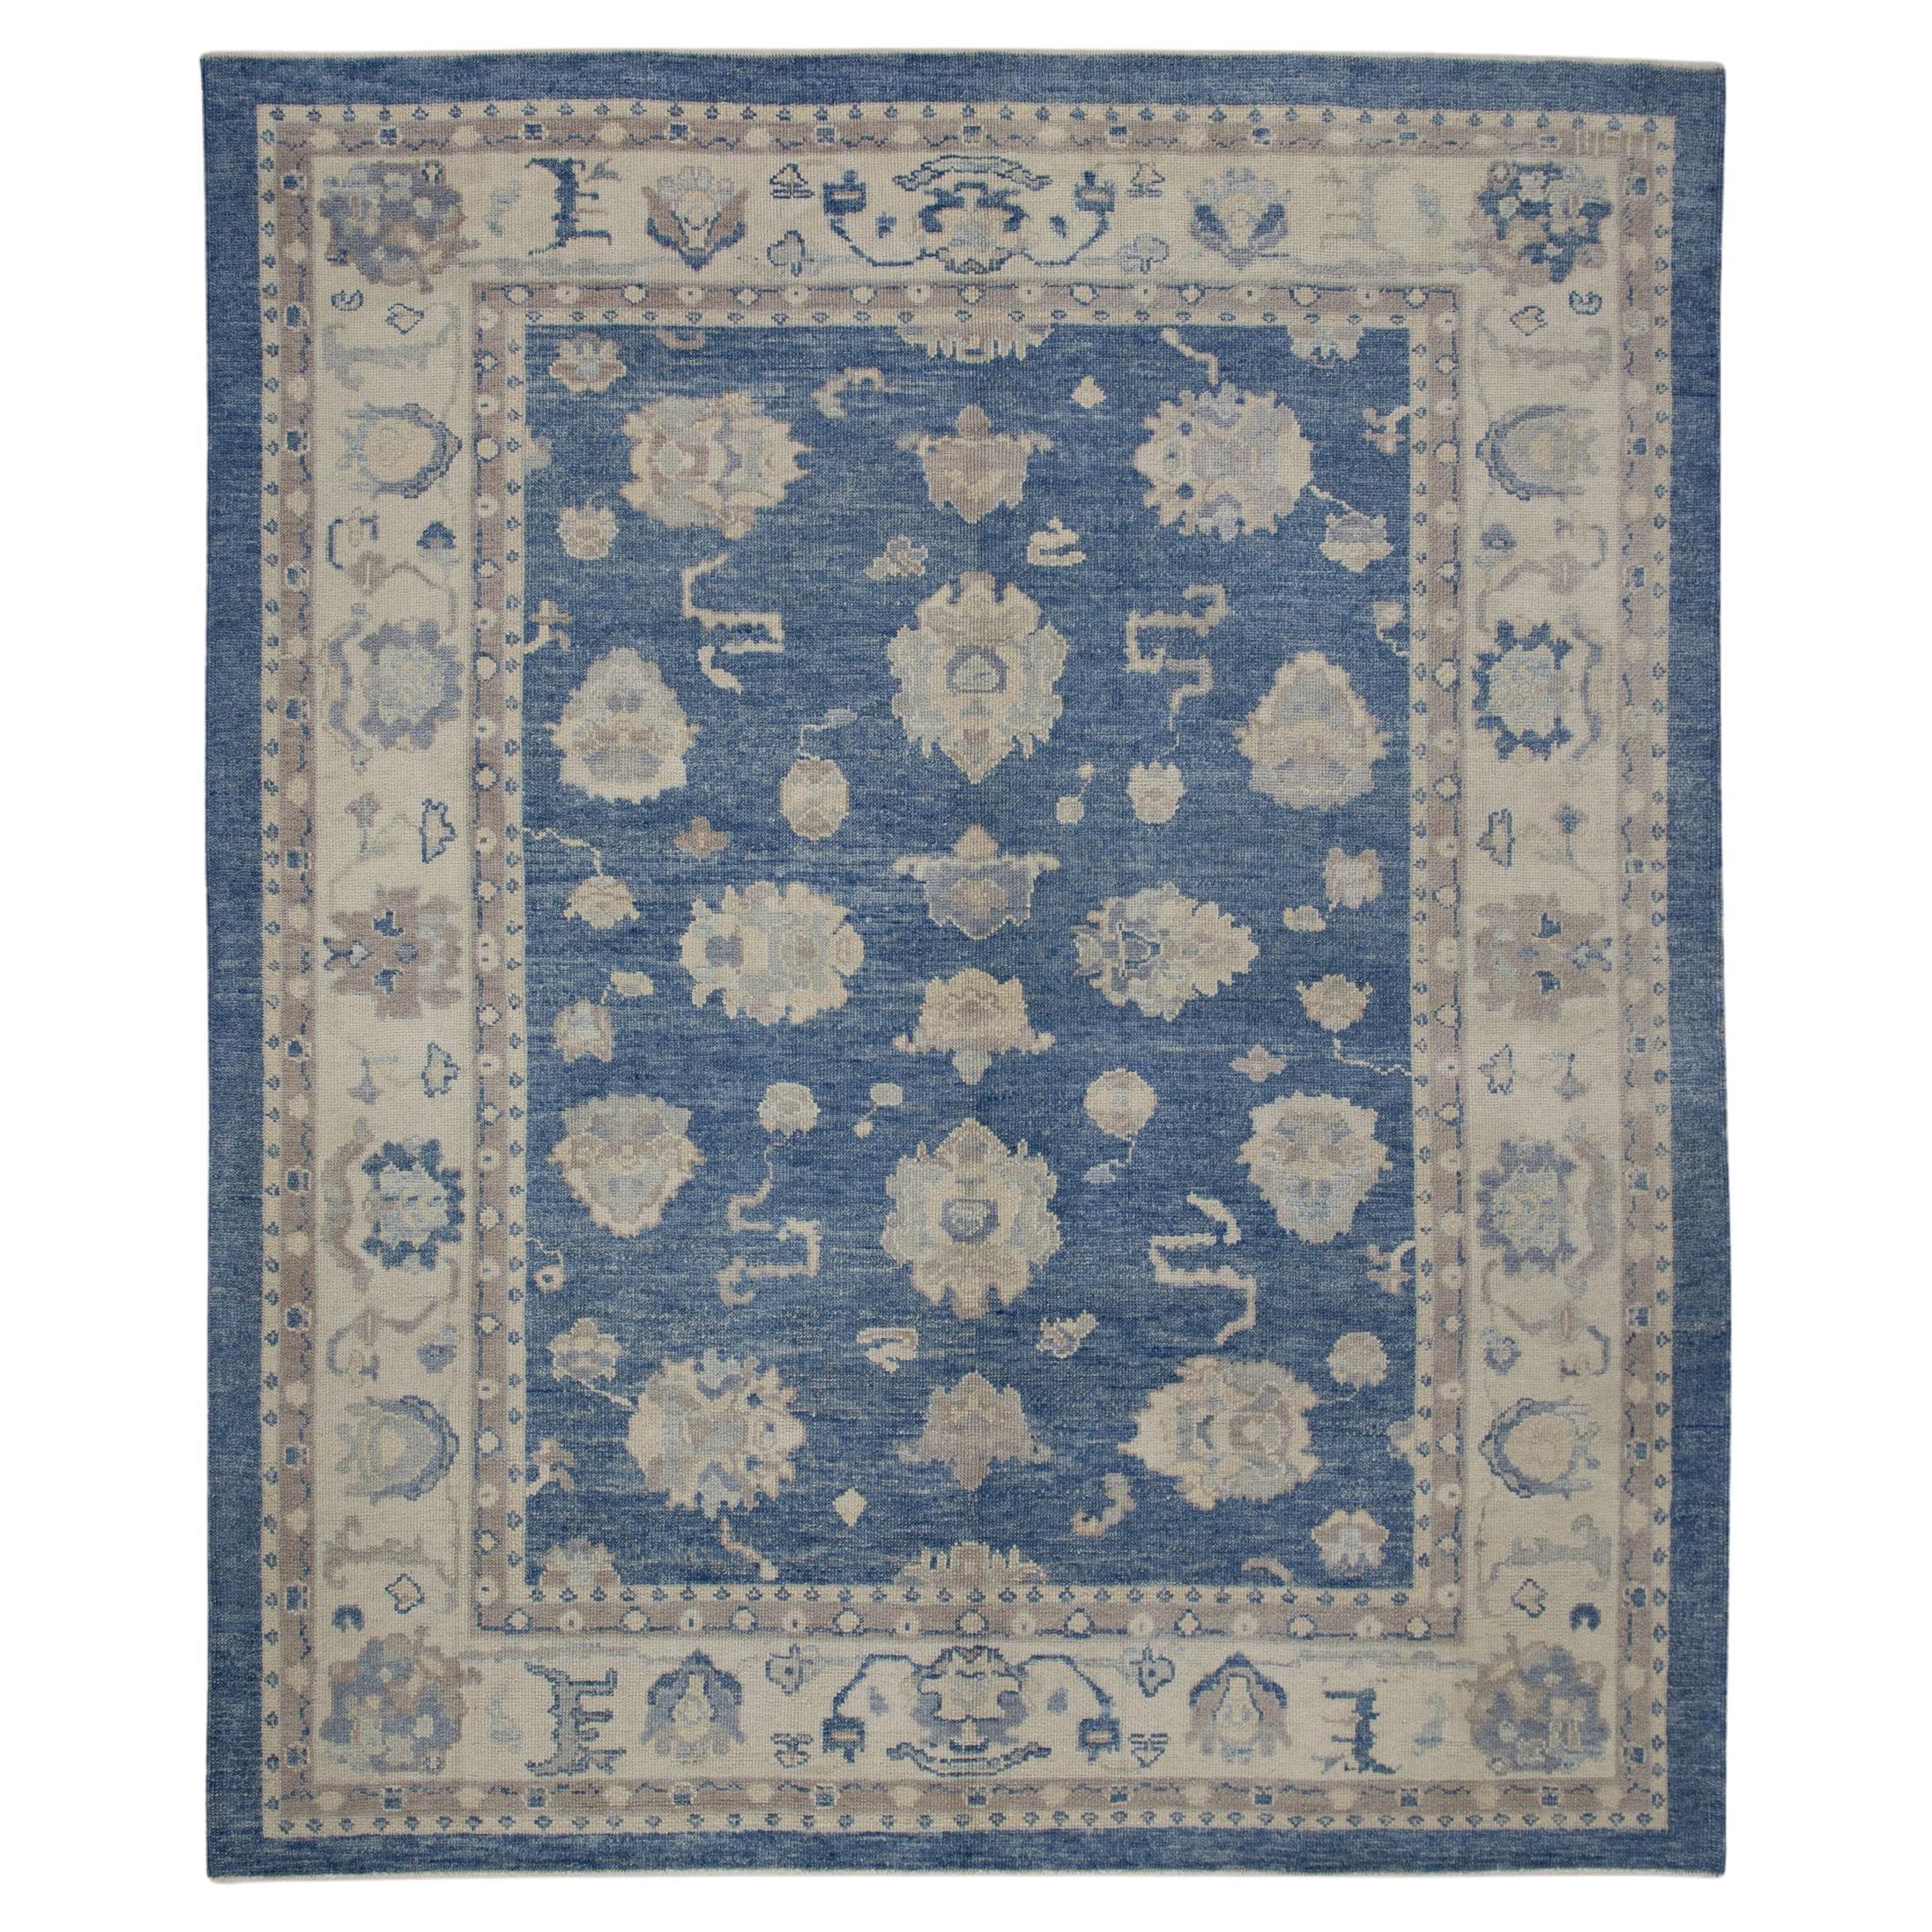 Floral Handwoven Wool Turkish Oushak Rug in Blue and Cream 8'9" x 10'1"